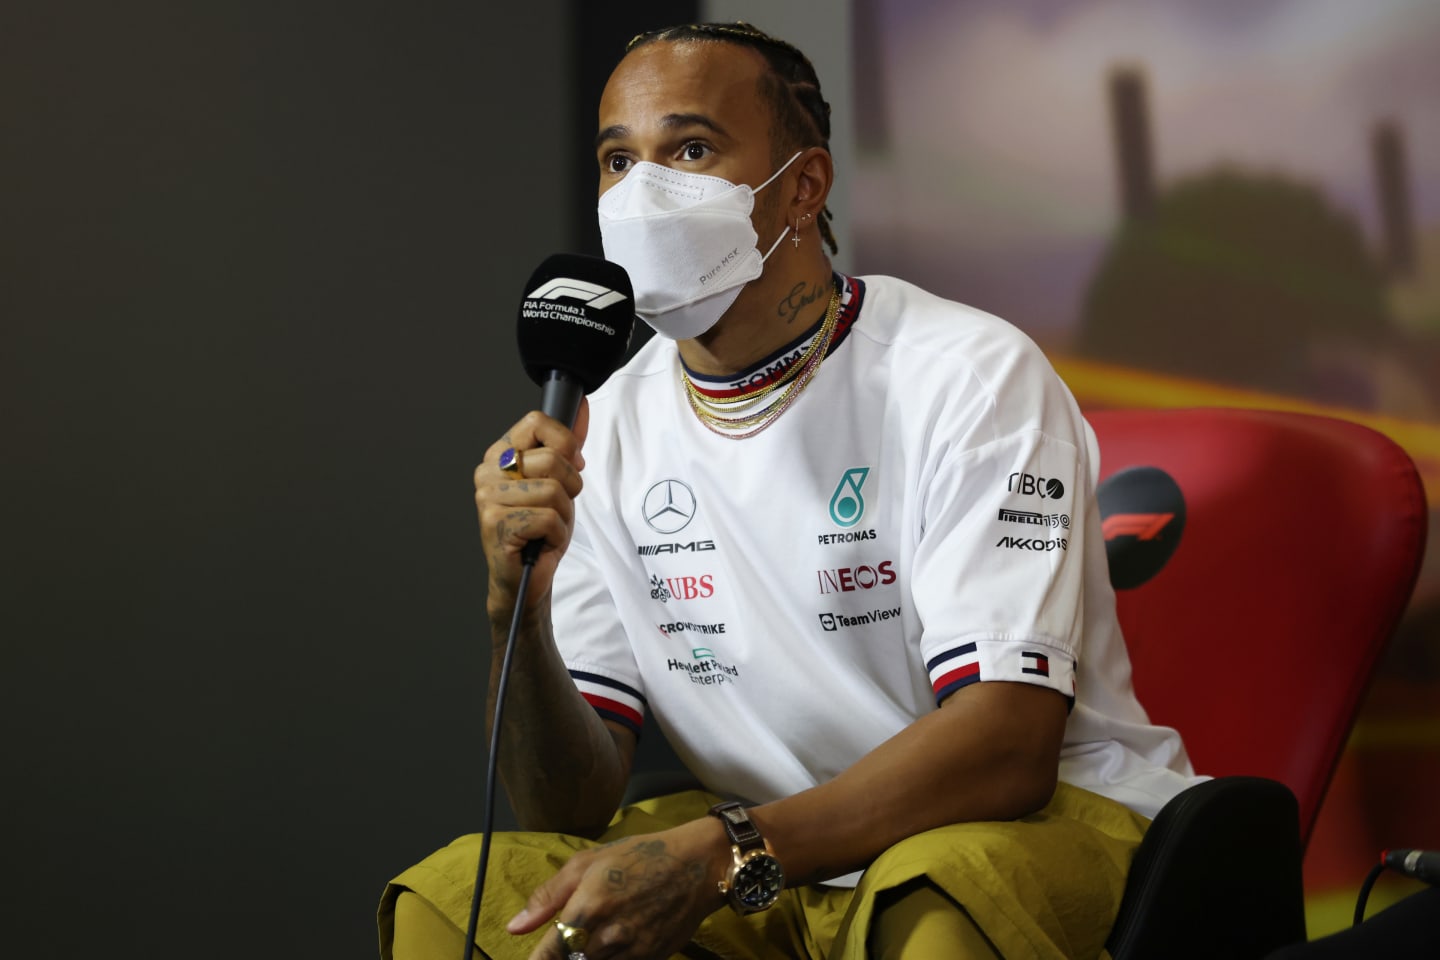 BARCELONA, SPAIN - MAY 20: Lewis Hamilton of Great Britain and Mercedes talks in the Drivers Press Conference prior to practice ahead of the F1 Grand Prix of Spain at Circuit de Barcelona-Catalunya on May 20, 2022 in Barcelona, Spain. (Photo by Bryn Lennon/Getty Images)